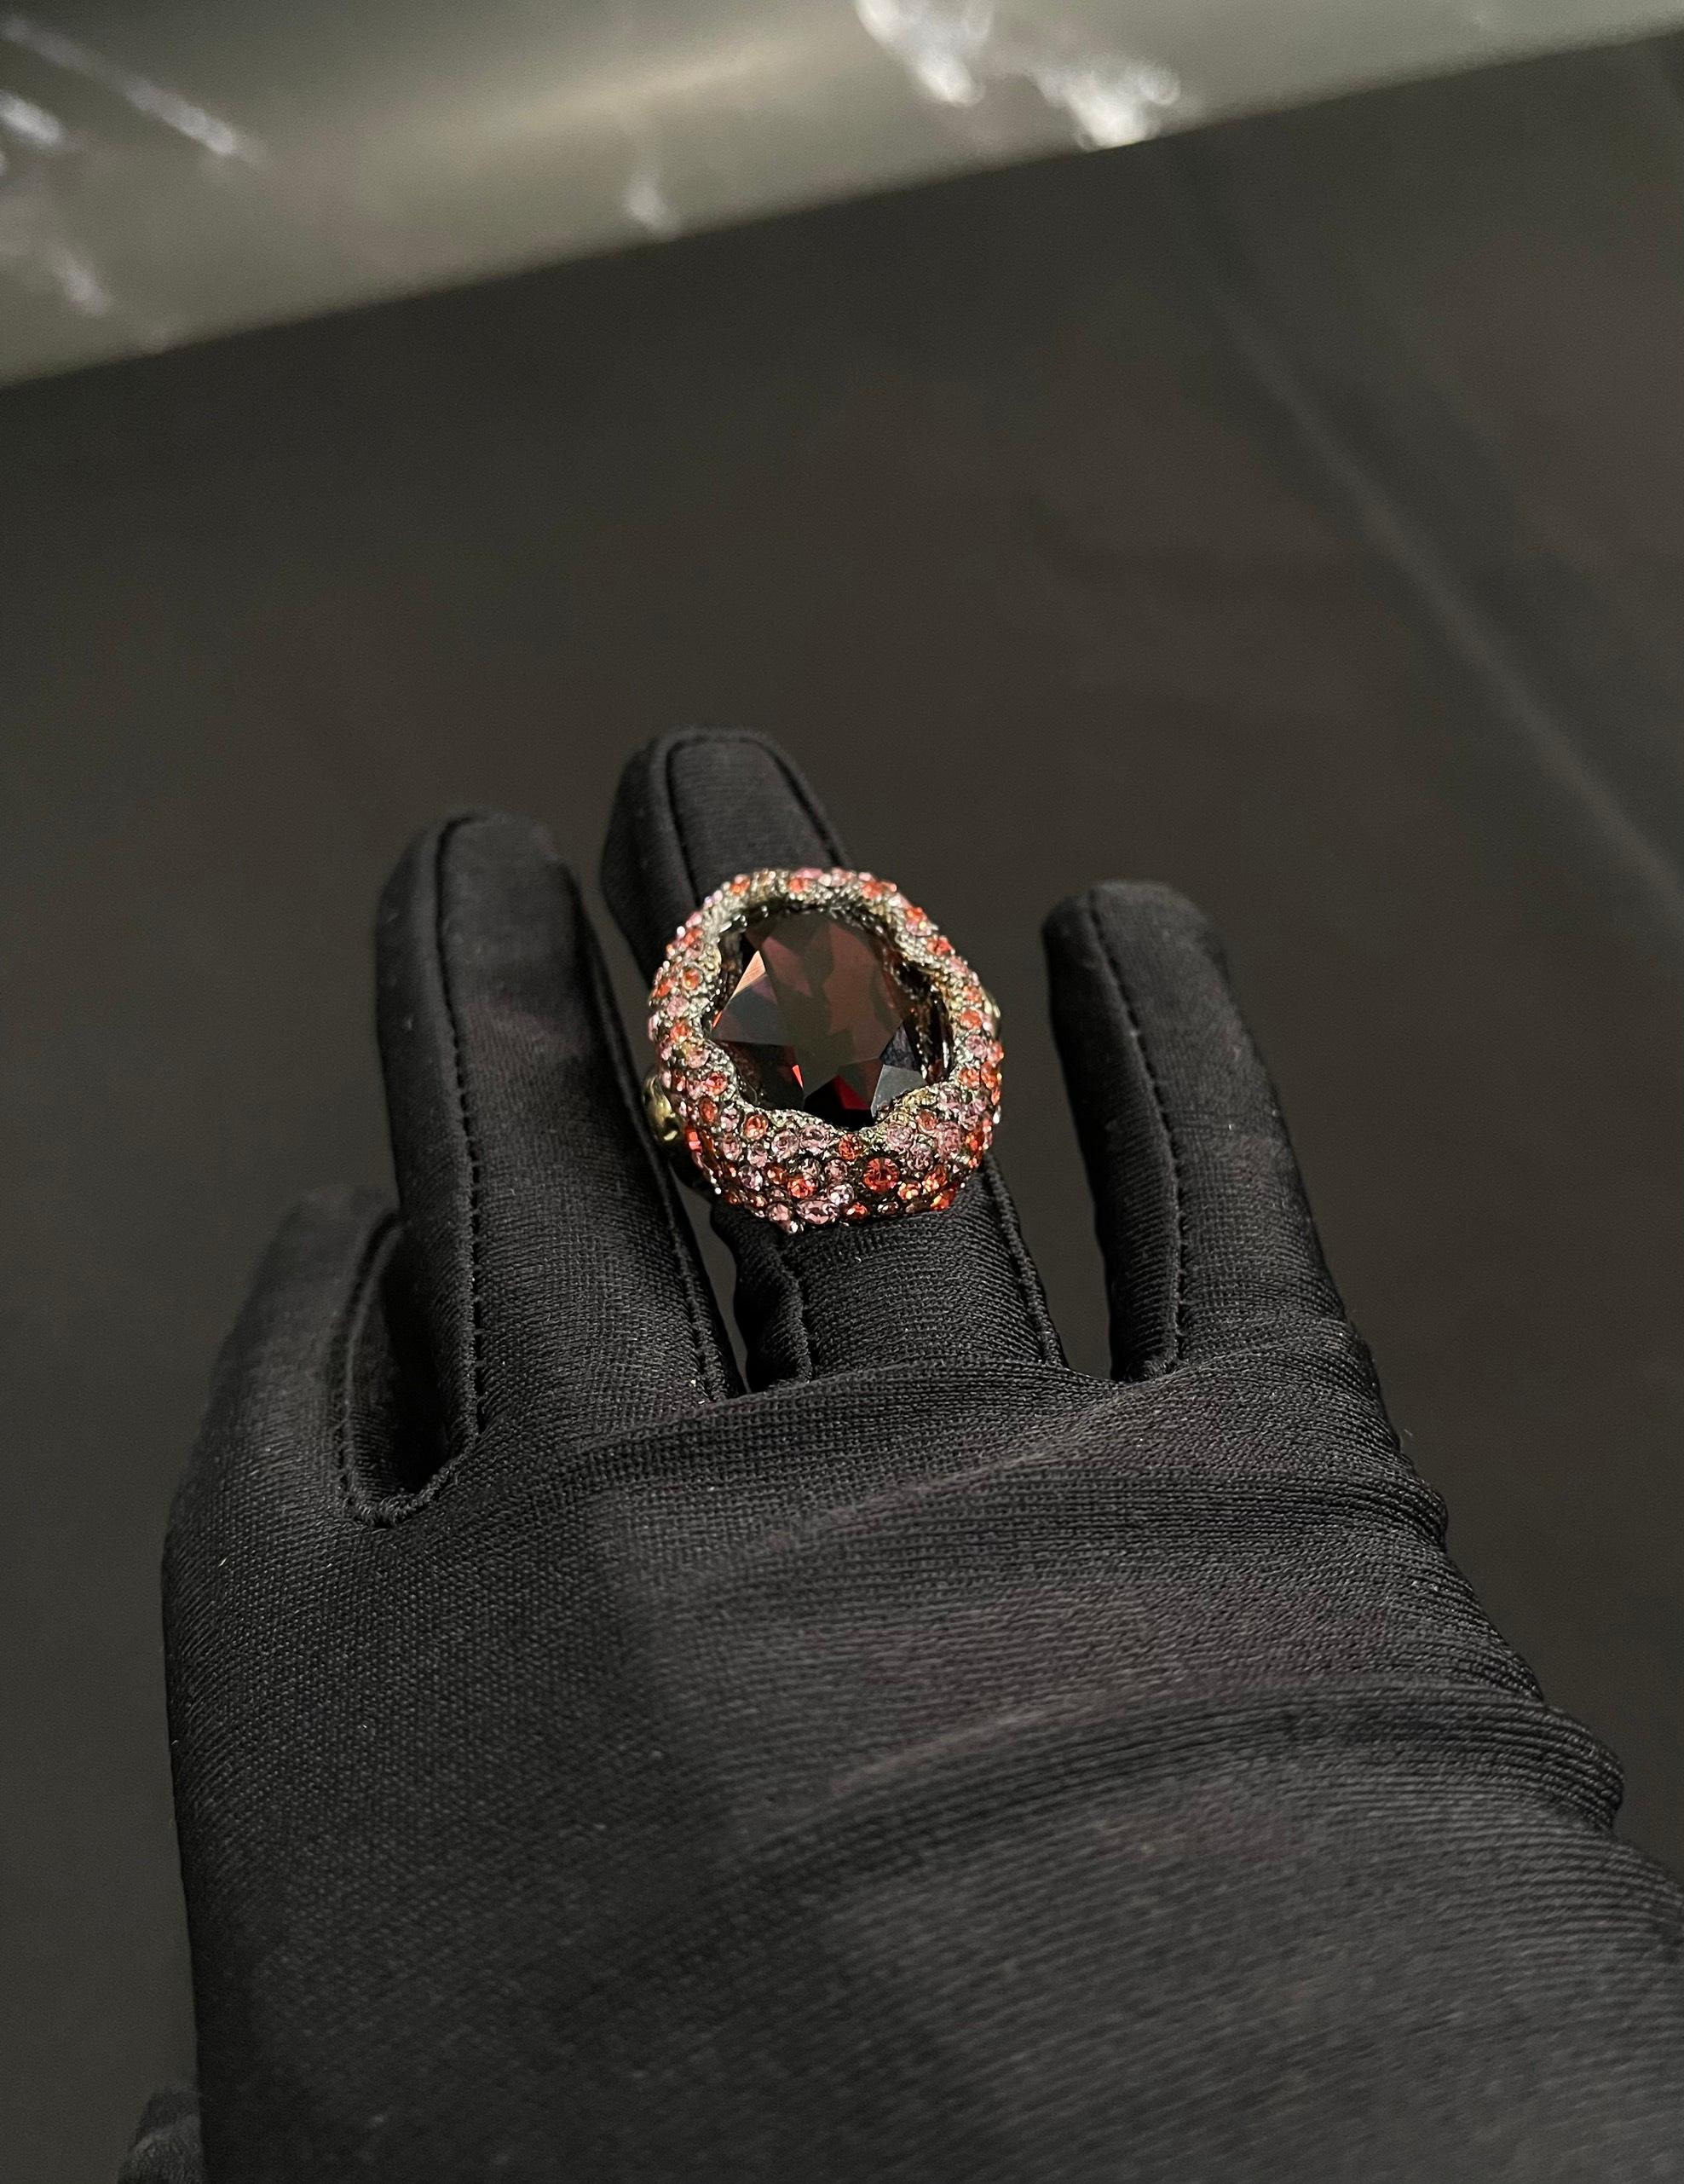 Roberto Cavalli Gemstones Embellished Ring In New Condition For Sale In Tương Mai Ward, Hoang Mai District